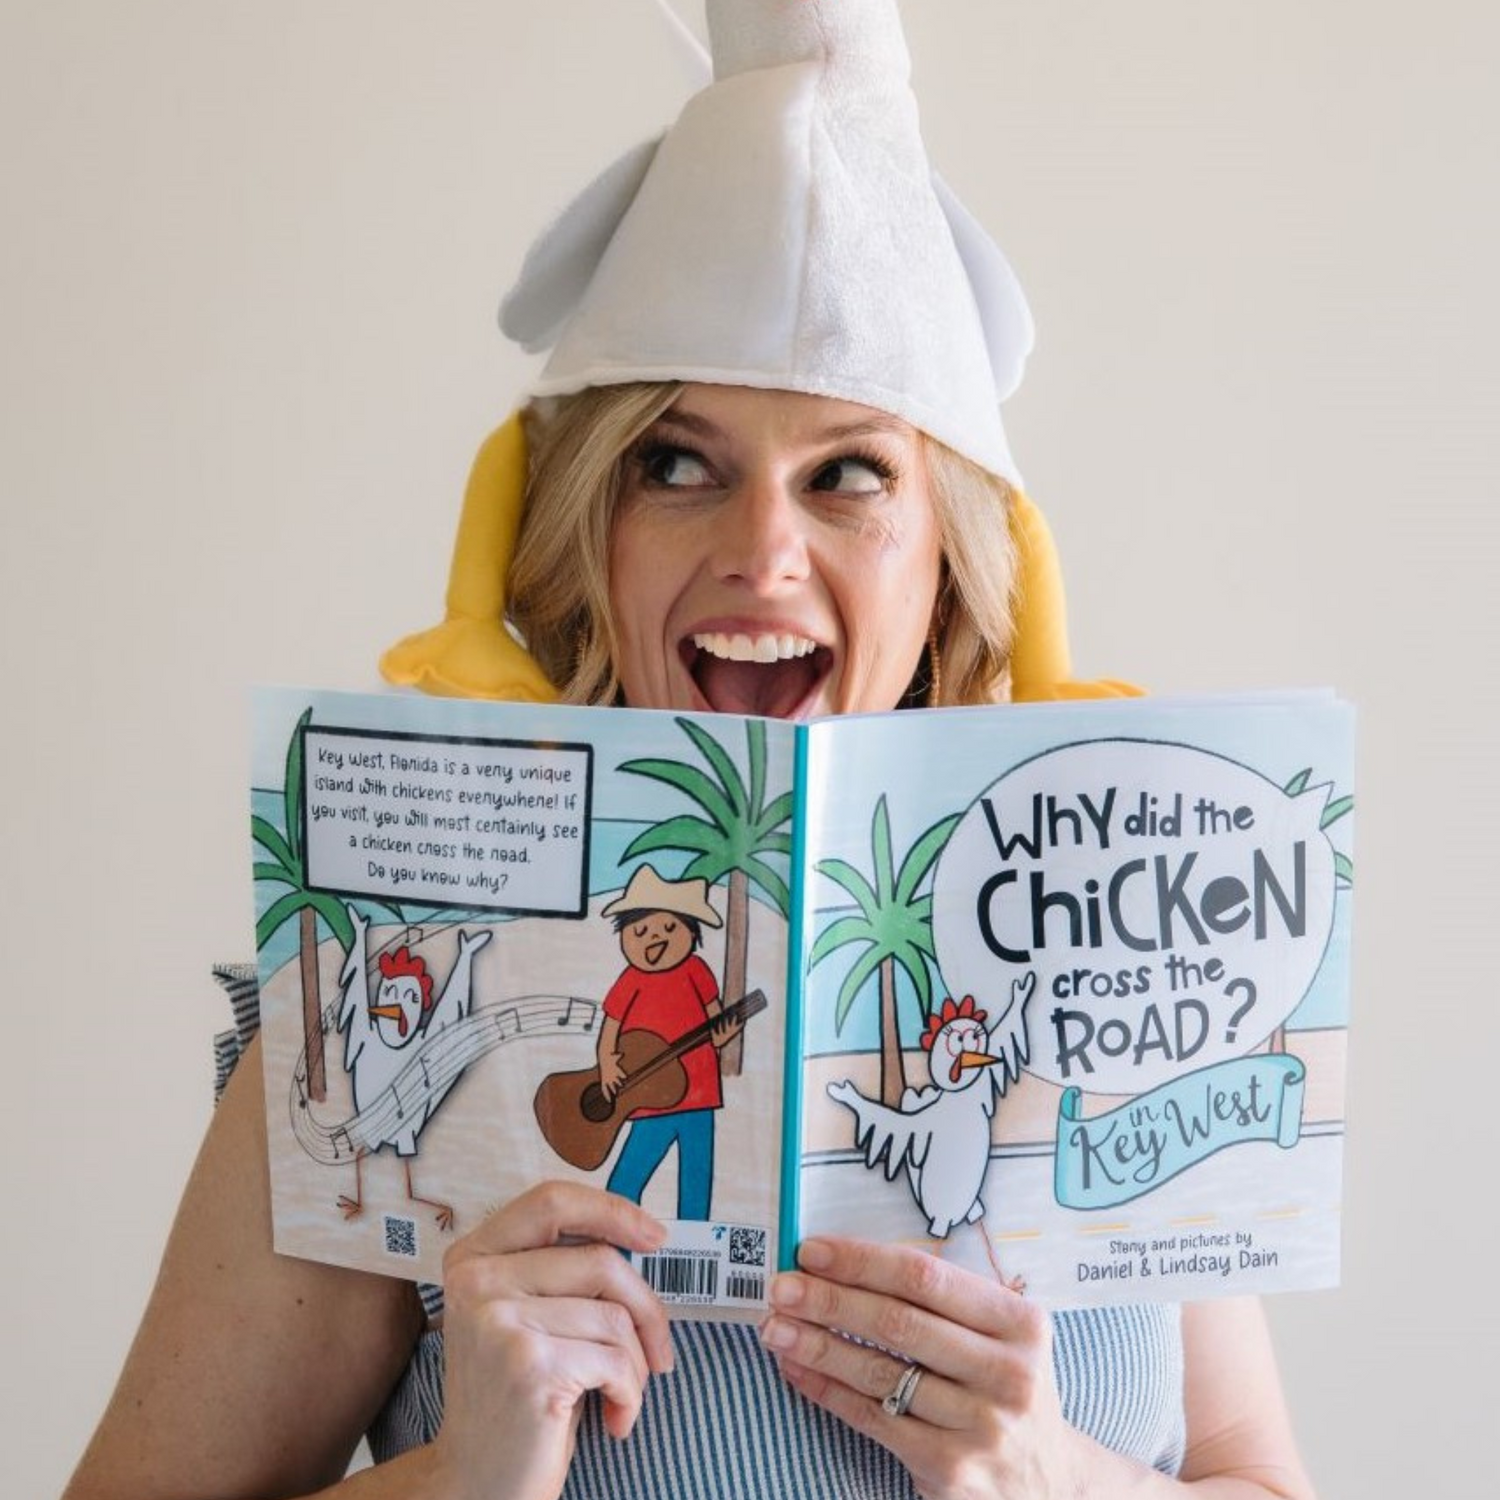 Self-Published author and illustrator Lindsay Dain holding her book titled "Why Did the Chicken Cross the Road in Key West?" created on Amazon KDP